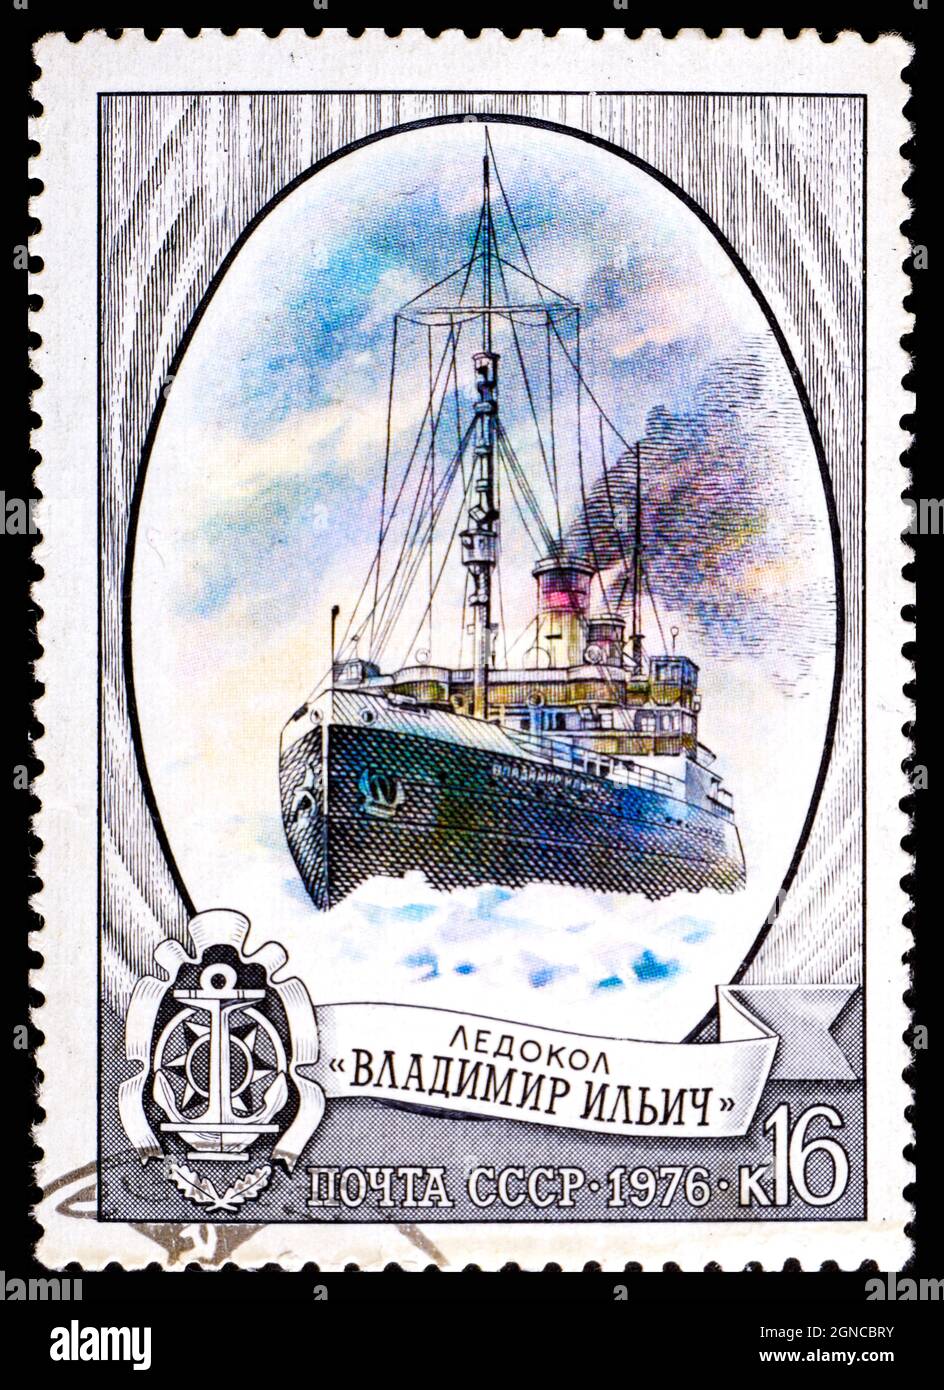 USSR - CIRCA 1976: A stamp printed in the USSR shows Icebreaker Vladimir Illich, one stamp from seies Stock Photo